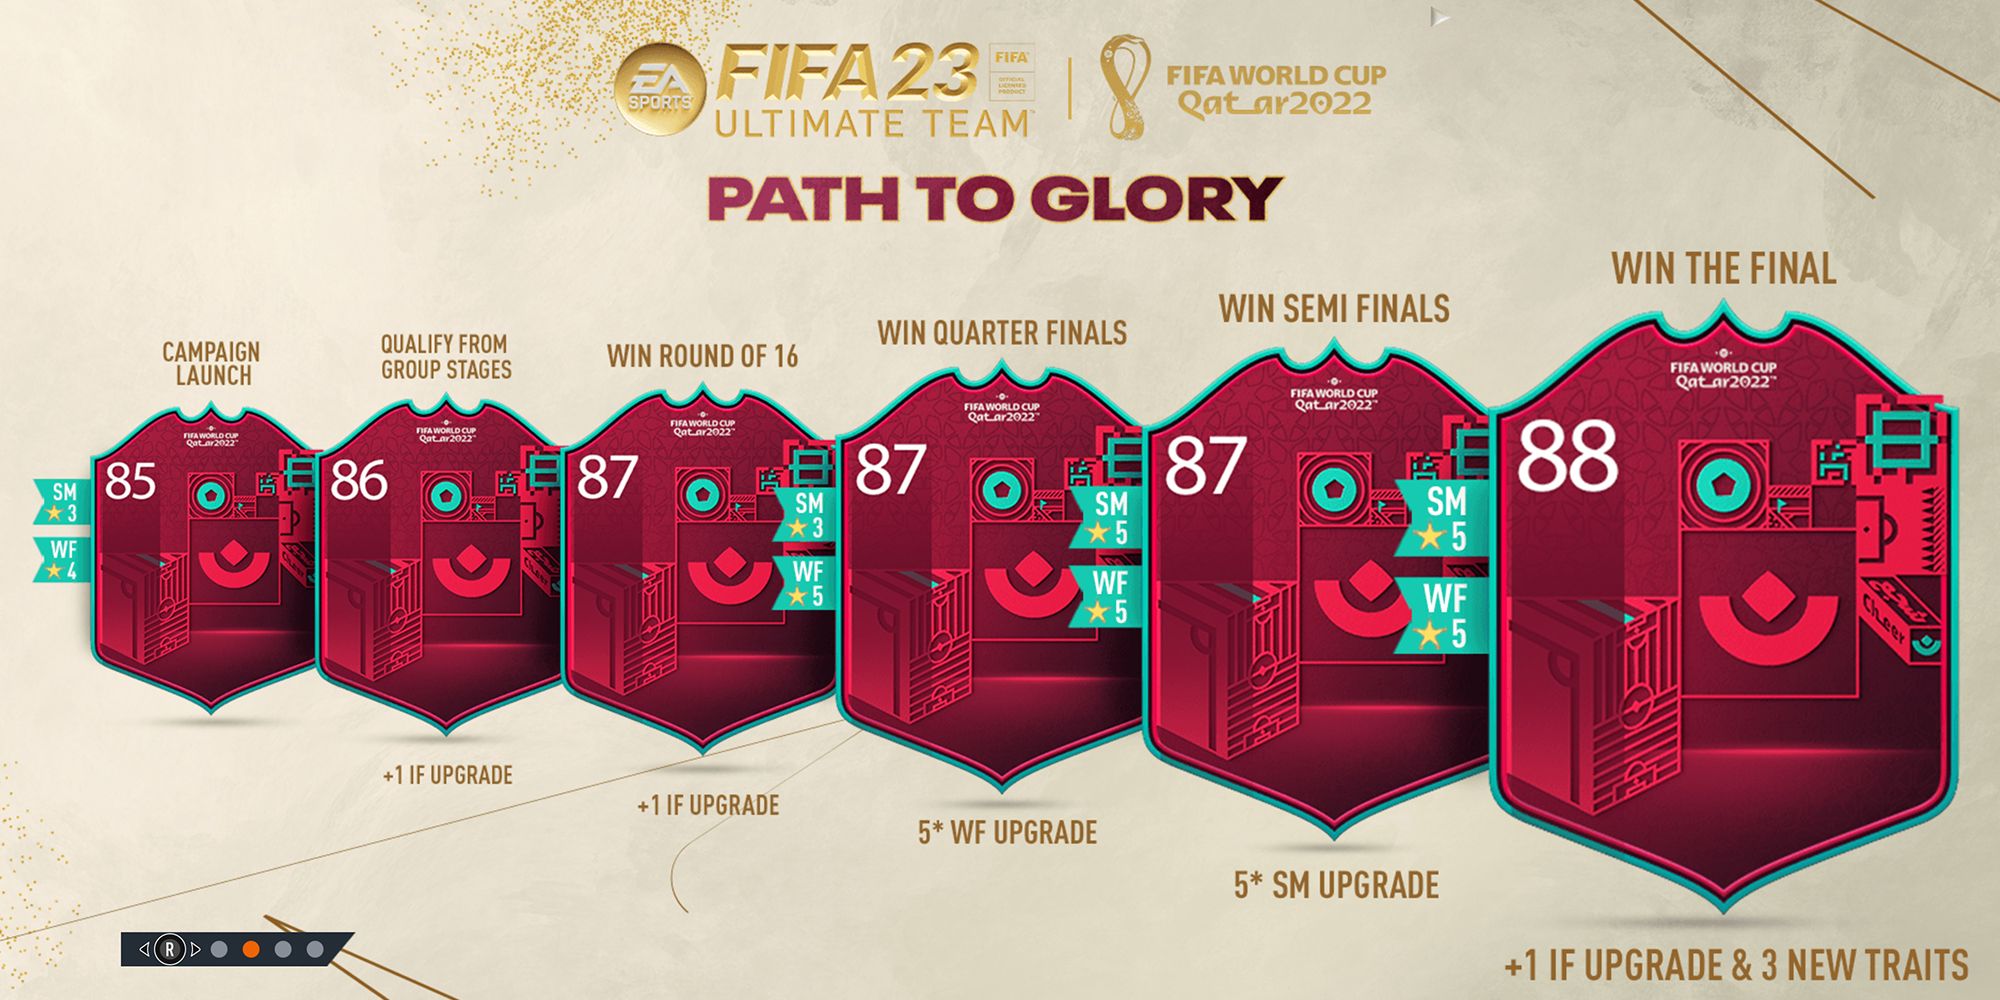 Screenshot Of Upcoming Ultimate Team Path To Glory Cards In FIFA 23 World Cup Mode